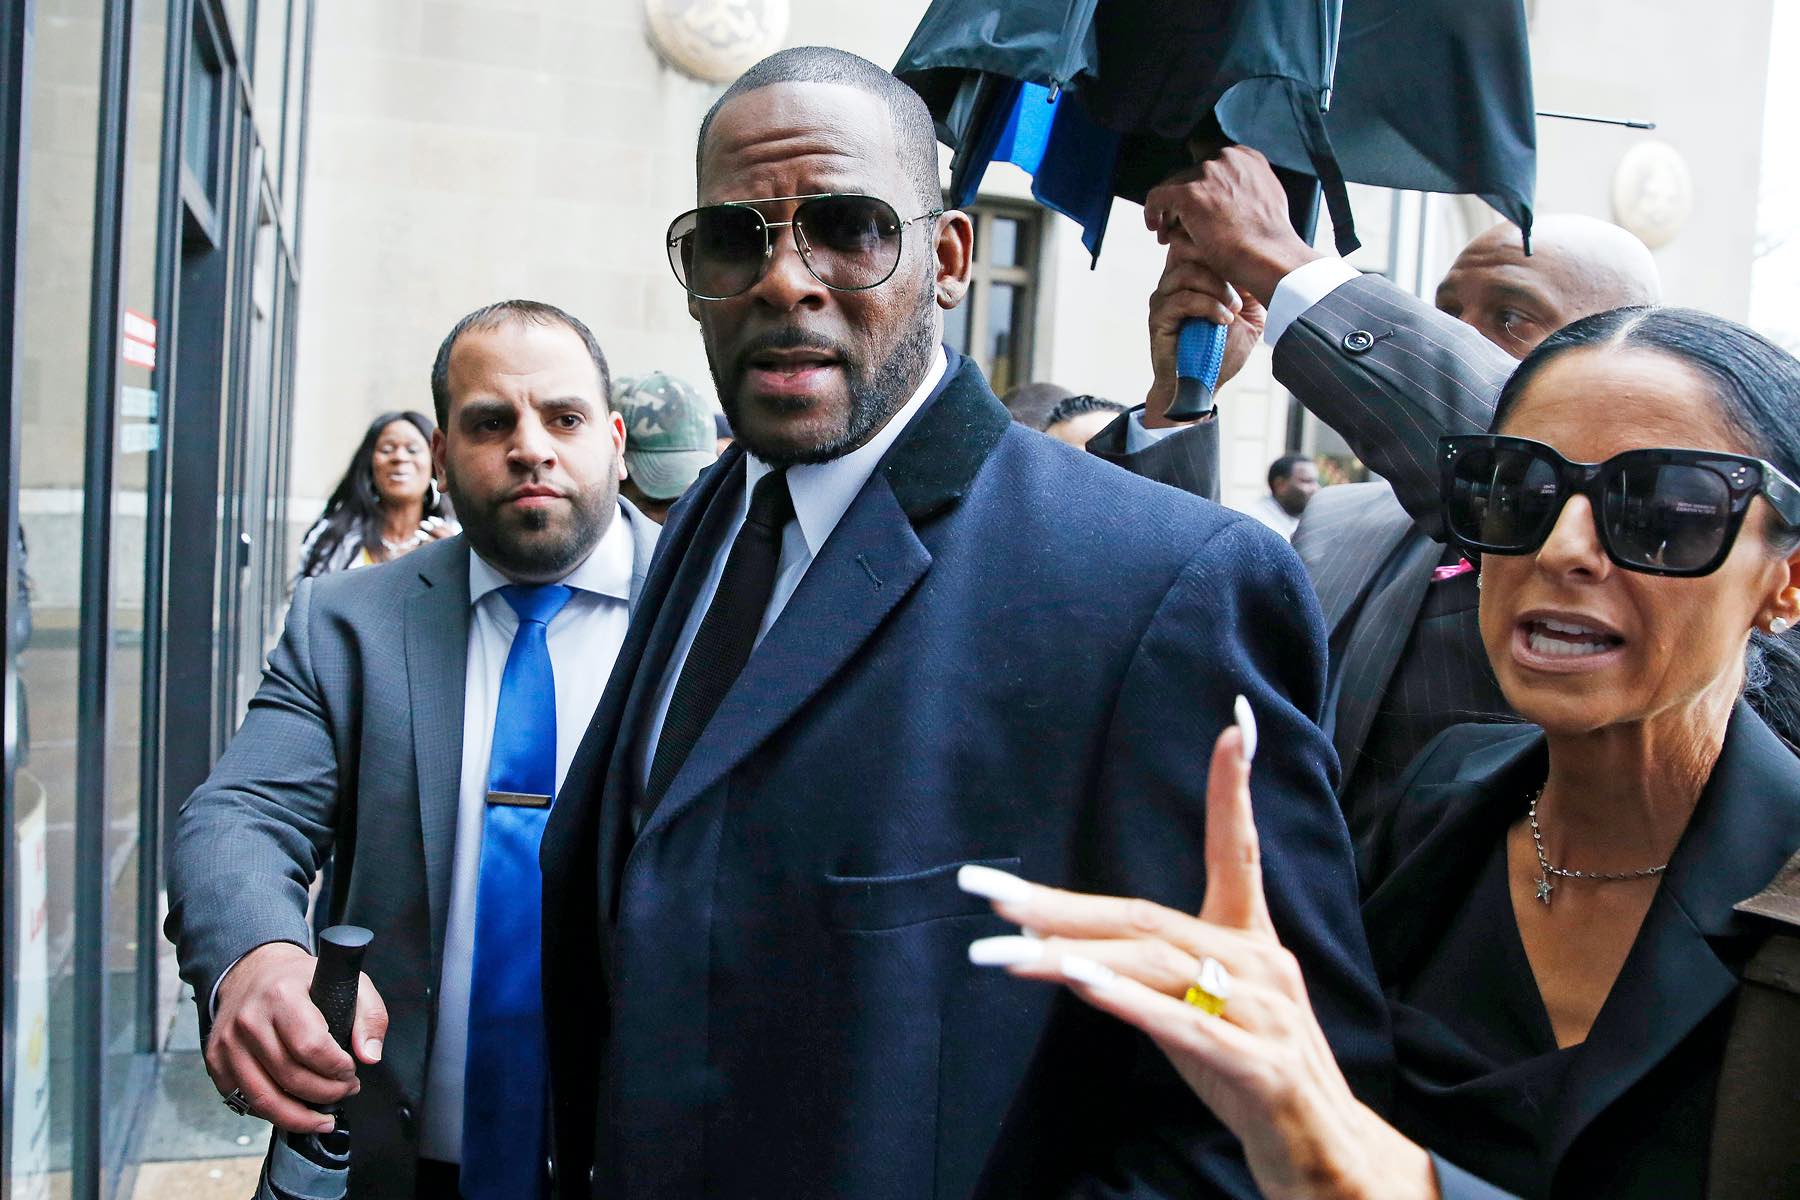 A theater had to cancel their screening of the Lifetime docuseries 'Surviving R. Kelly' after threats were called in. Who would do such a thing?